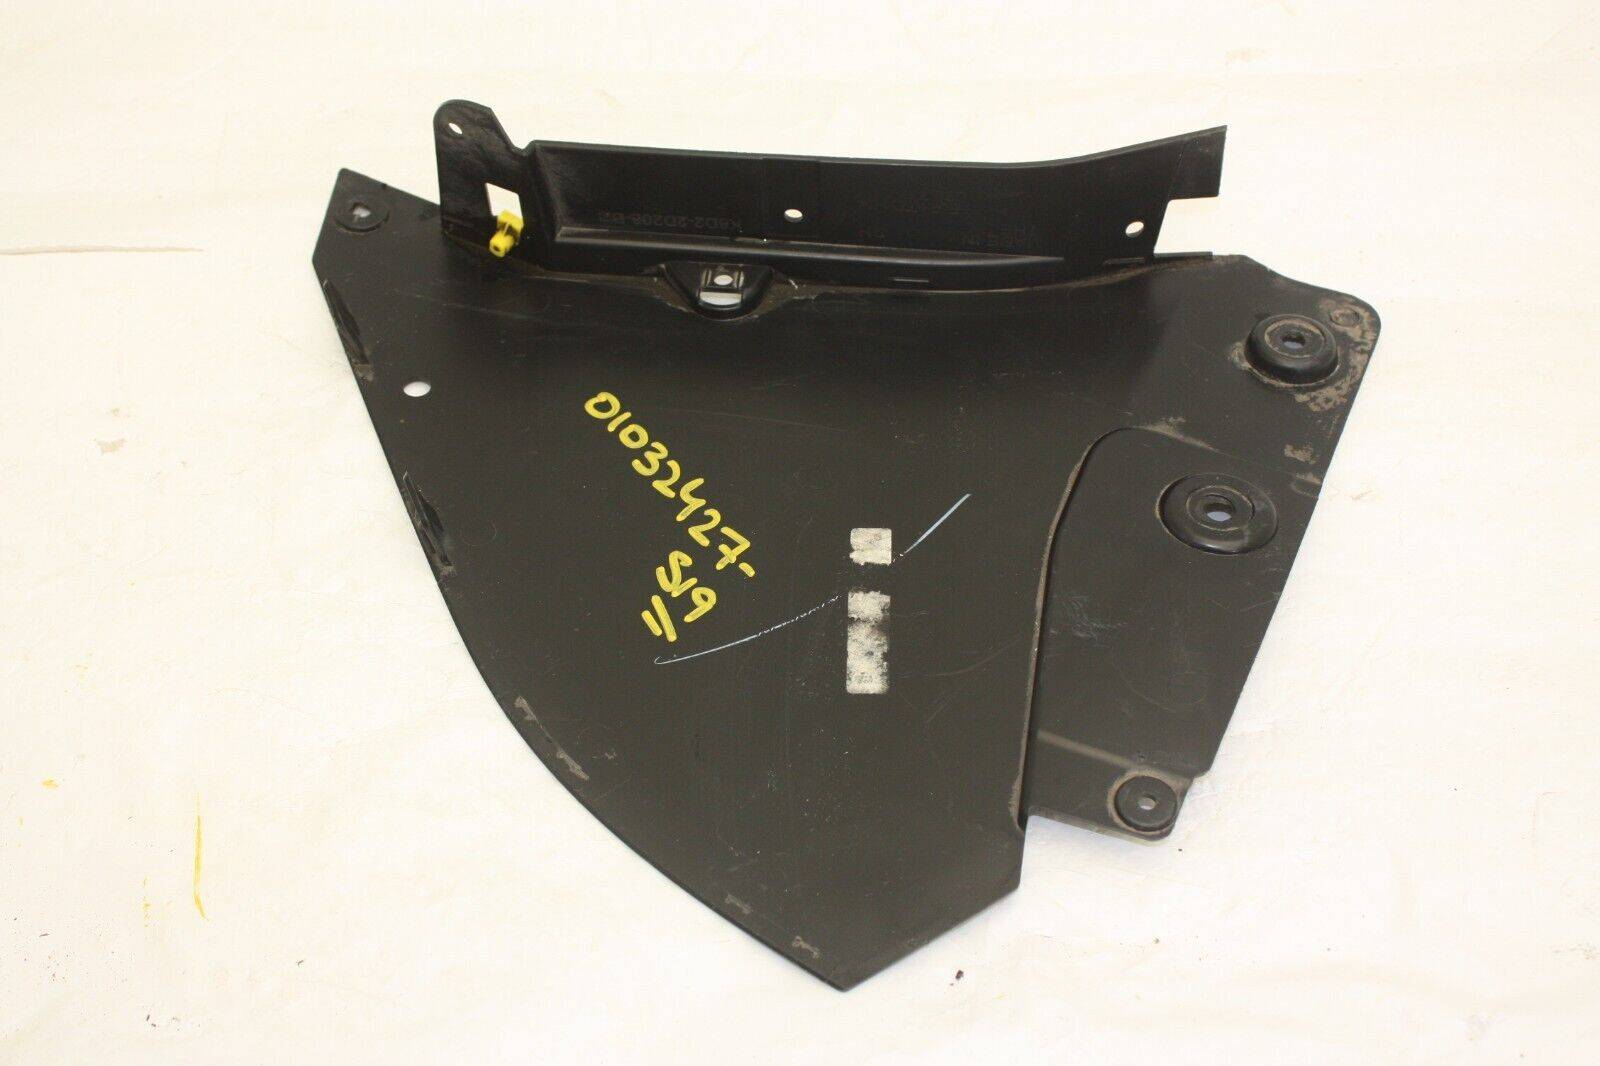 Range-Rover-Evoque-Front-Bumper-Lower-Right-Support-Section-K8D2-2D208-BB-176279606774-7